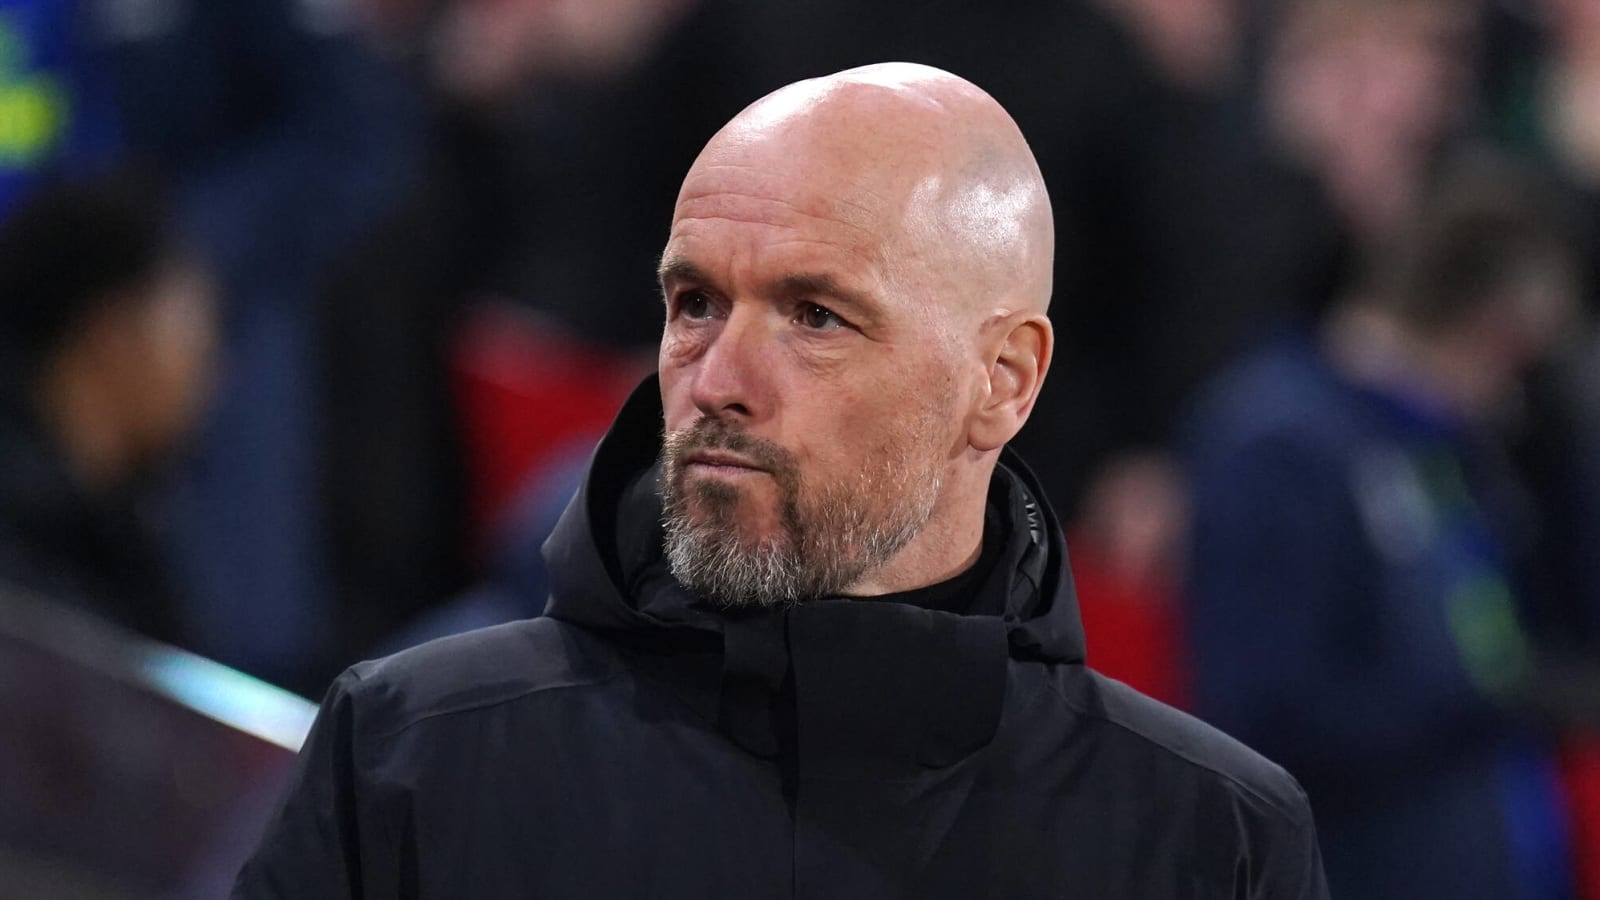 Erik ten Hag faces wage cut after Manchester United shortcomings